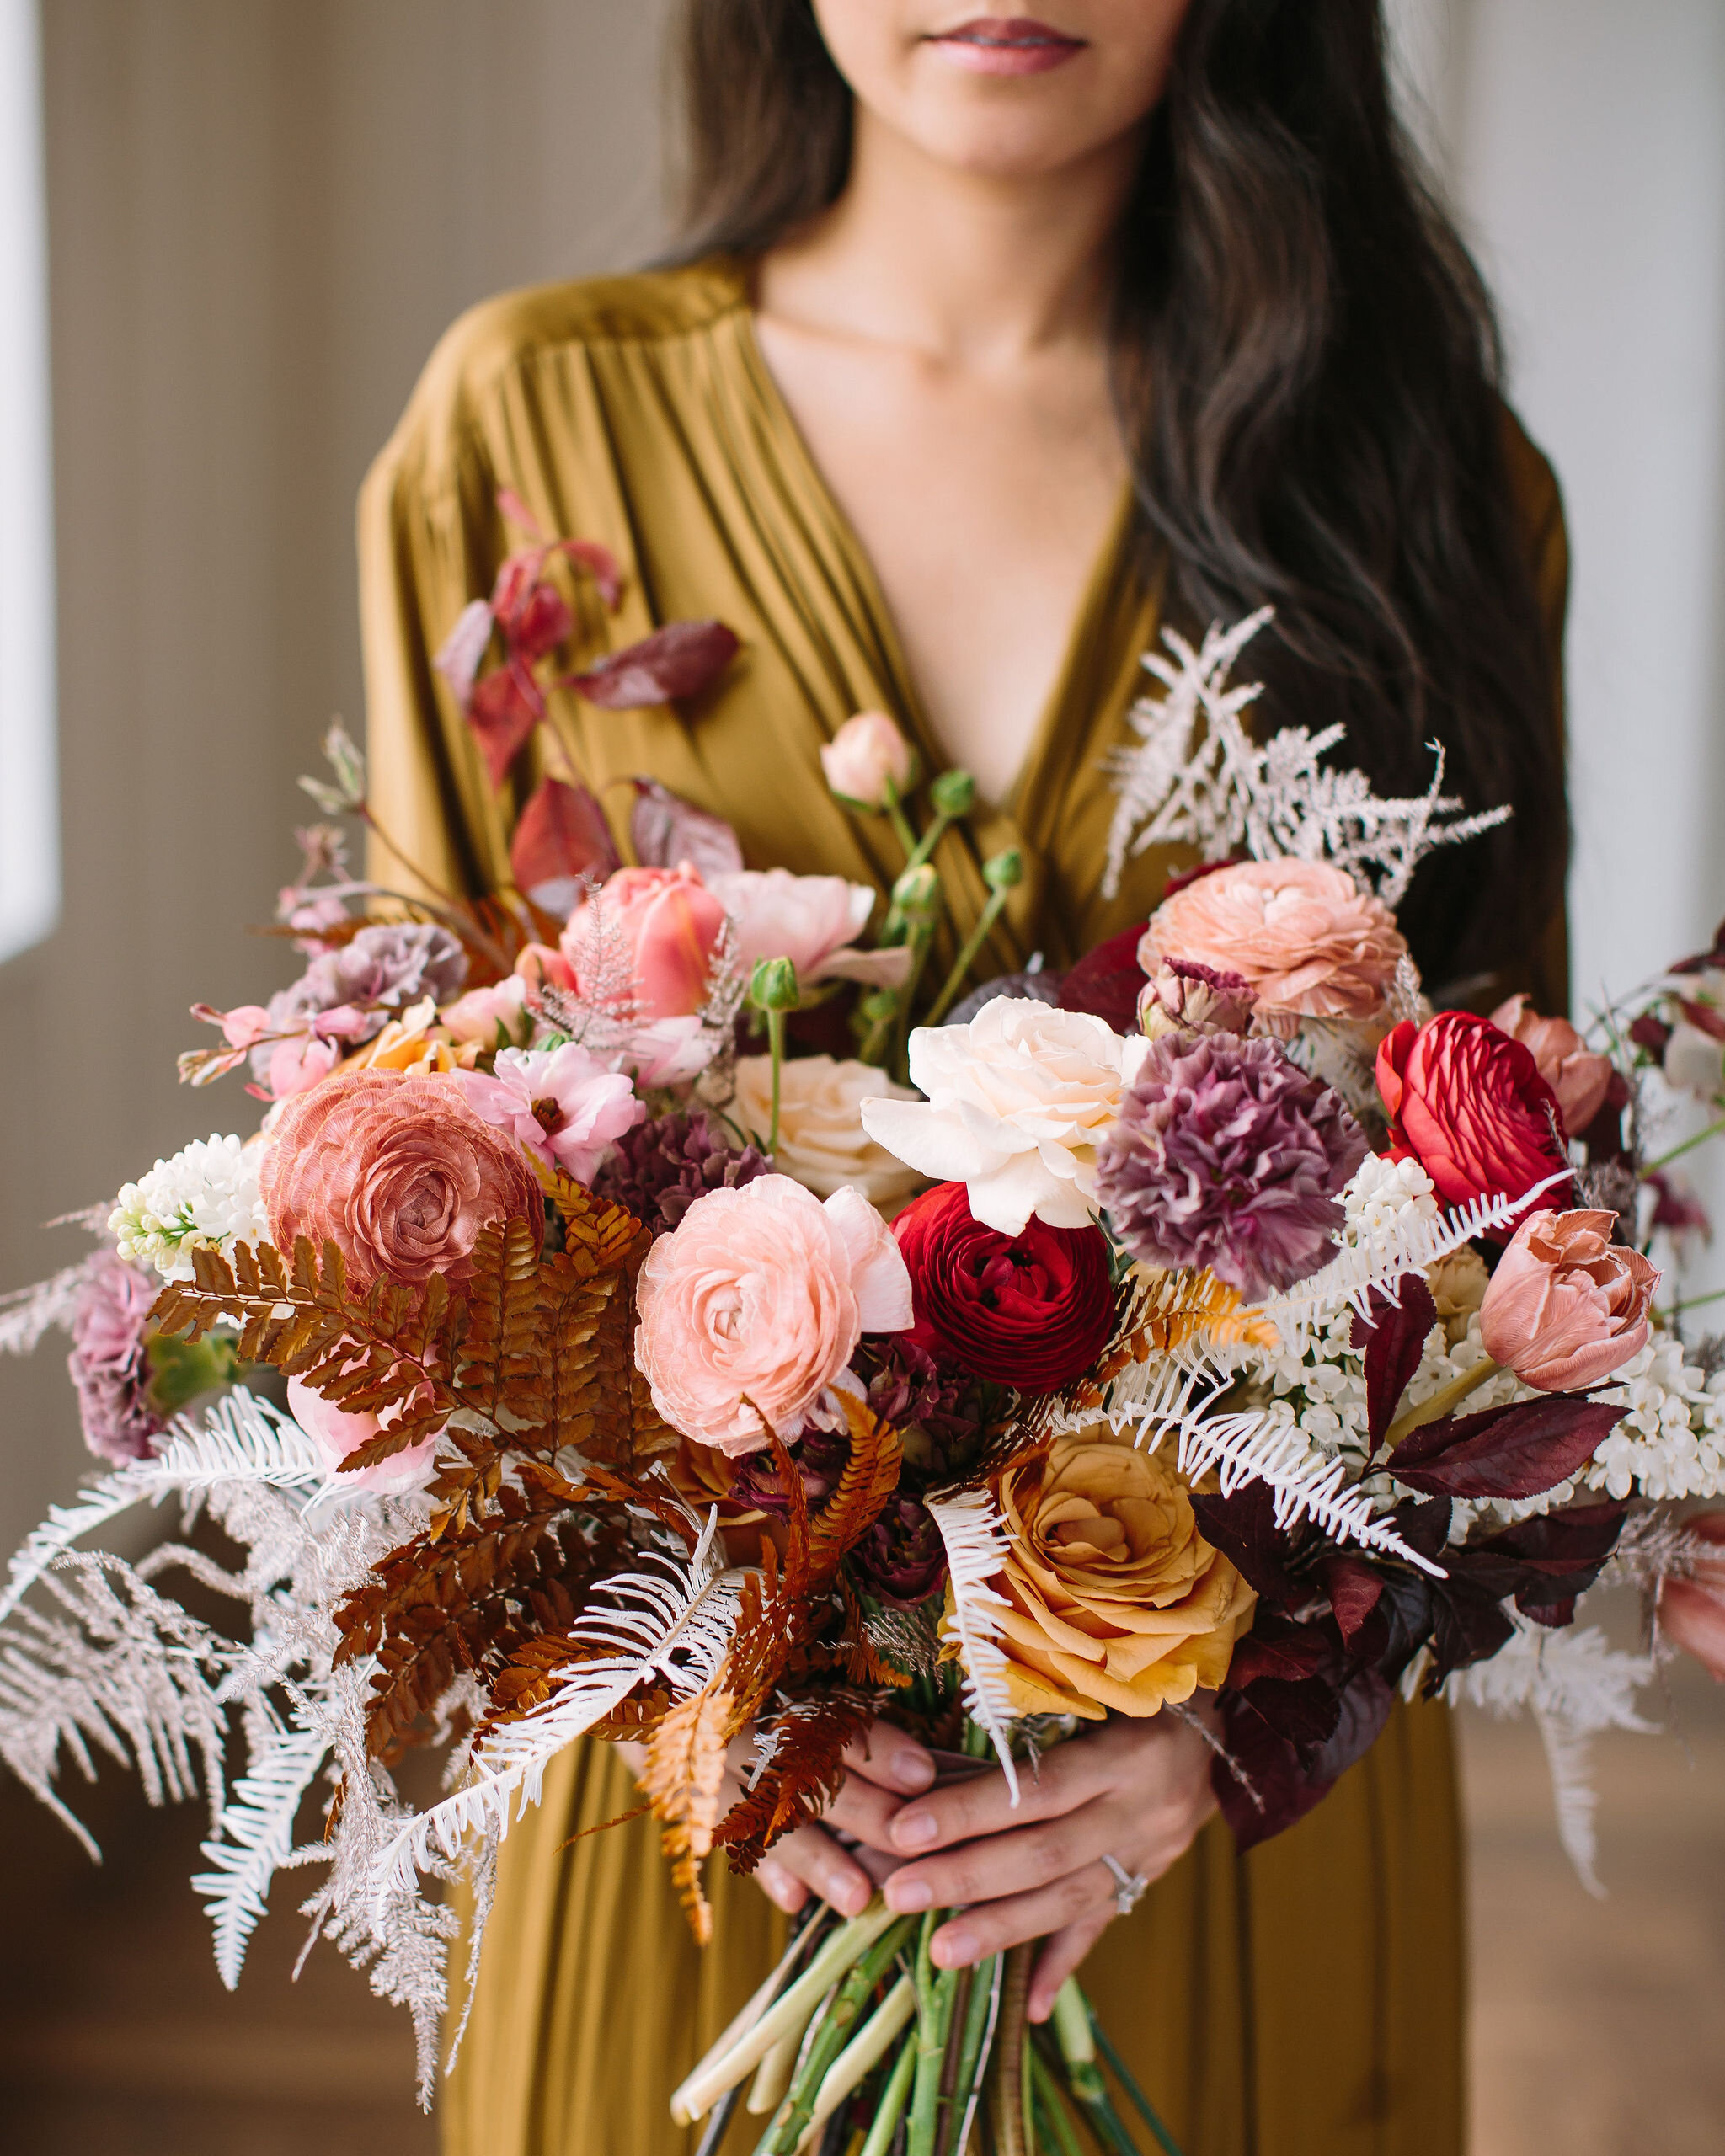 Organic, modern bouquet with dried white ferns, dusty pink ranunculus, golden brown ferns, spirea, bleeding hearts, and other dainty spring flowers. Nashville wedding and event floral design by Rosemary & Finch at 14Tenn.